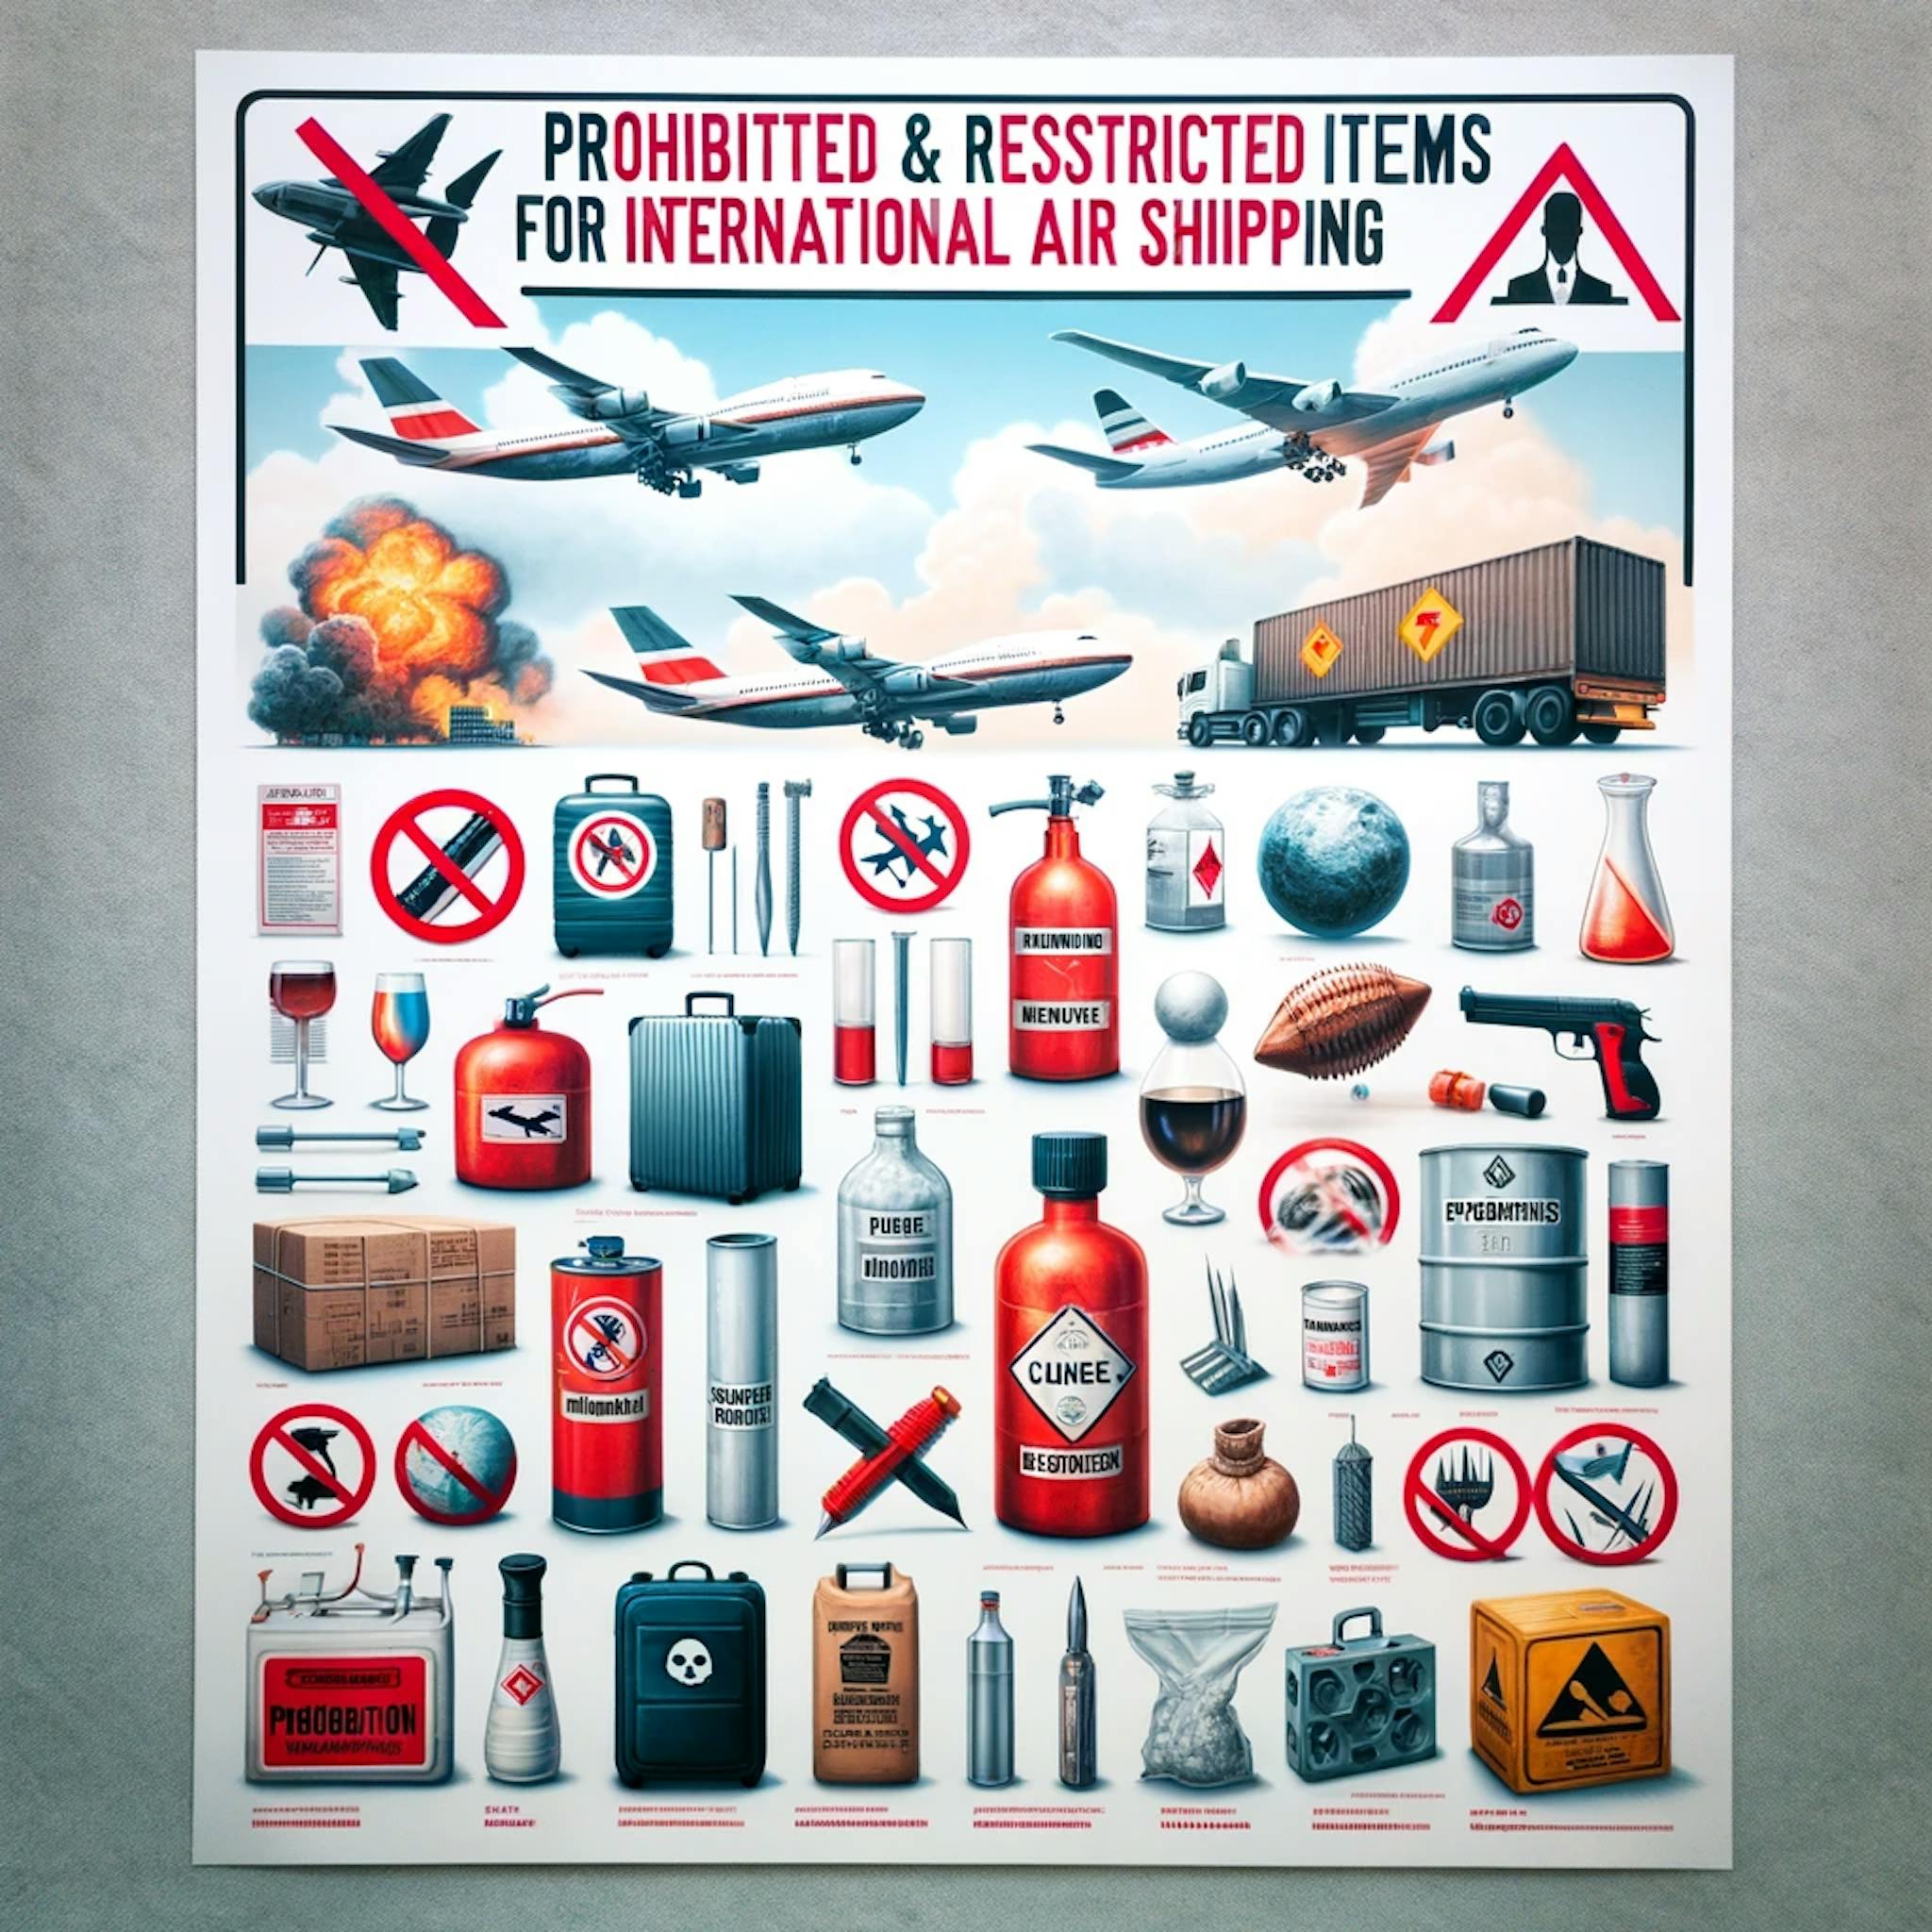 Poster showing prohibited and restricted items for international air shipping.